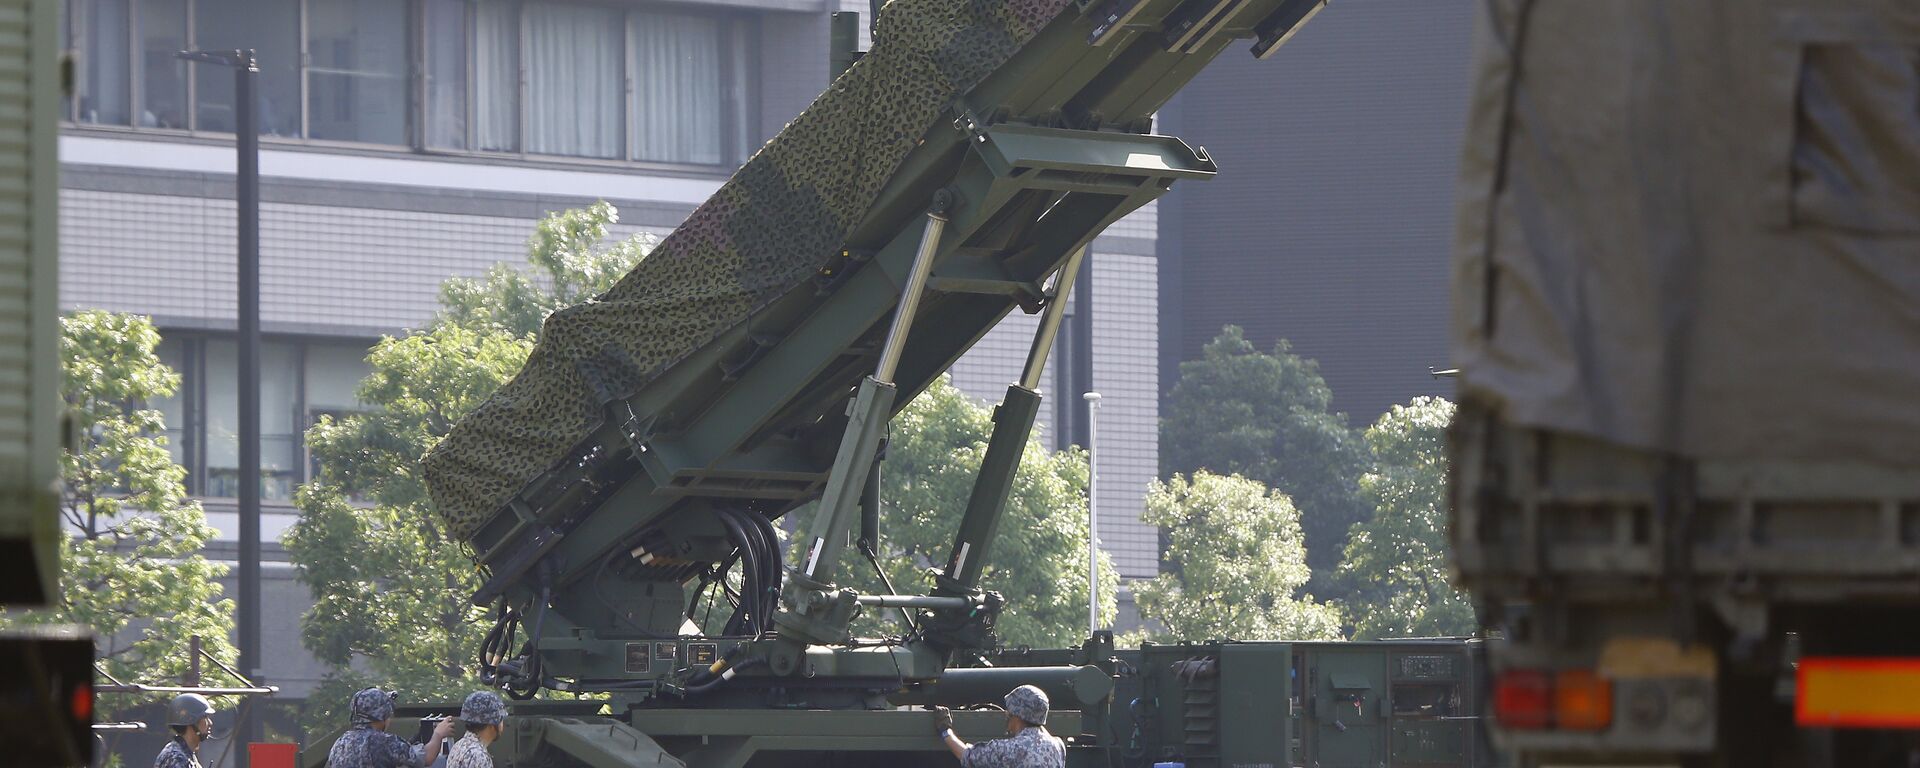 Japan Self-Defense Force members set up a PAC-3 Patriot missile unit deployed ahead of North Korea's planned rocket launch at the Defense Ministry in Tokyo, Tuesday, June 21, 2016 - Sputnik International, 1920, 12.07.2018